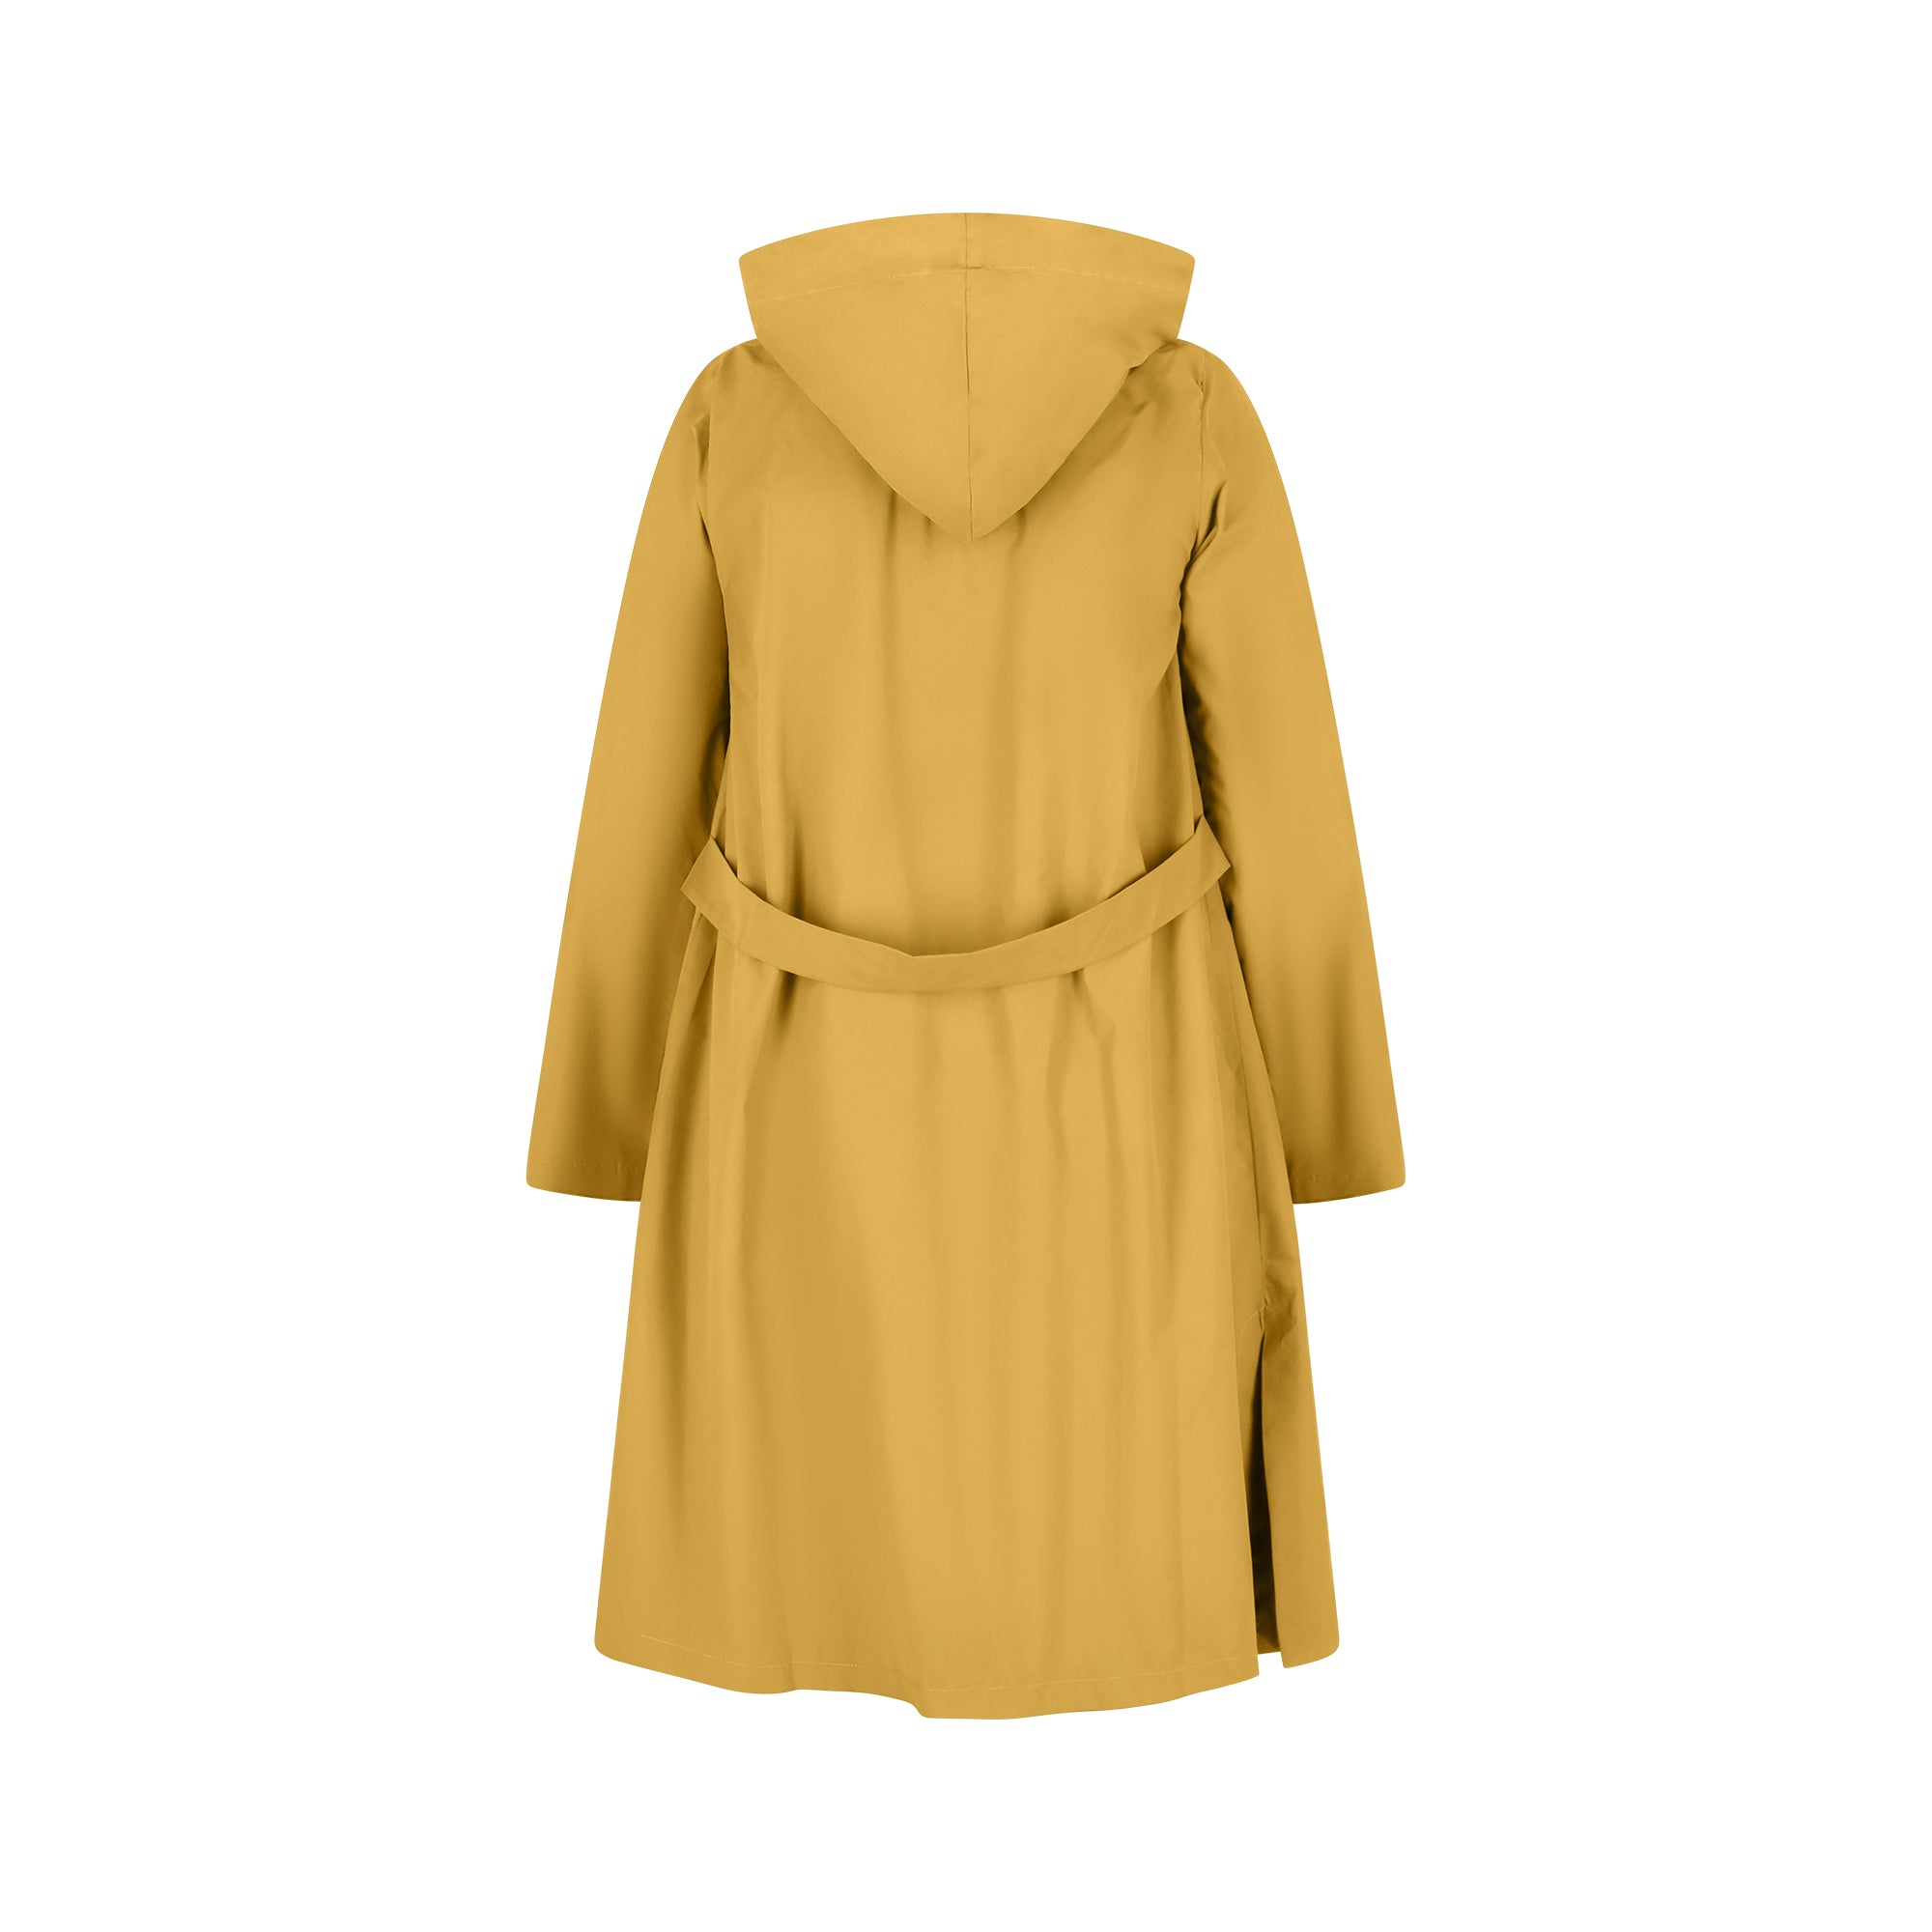 The classic raincoat - curry color - back view